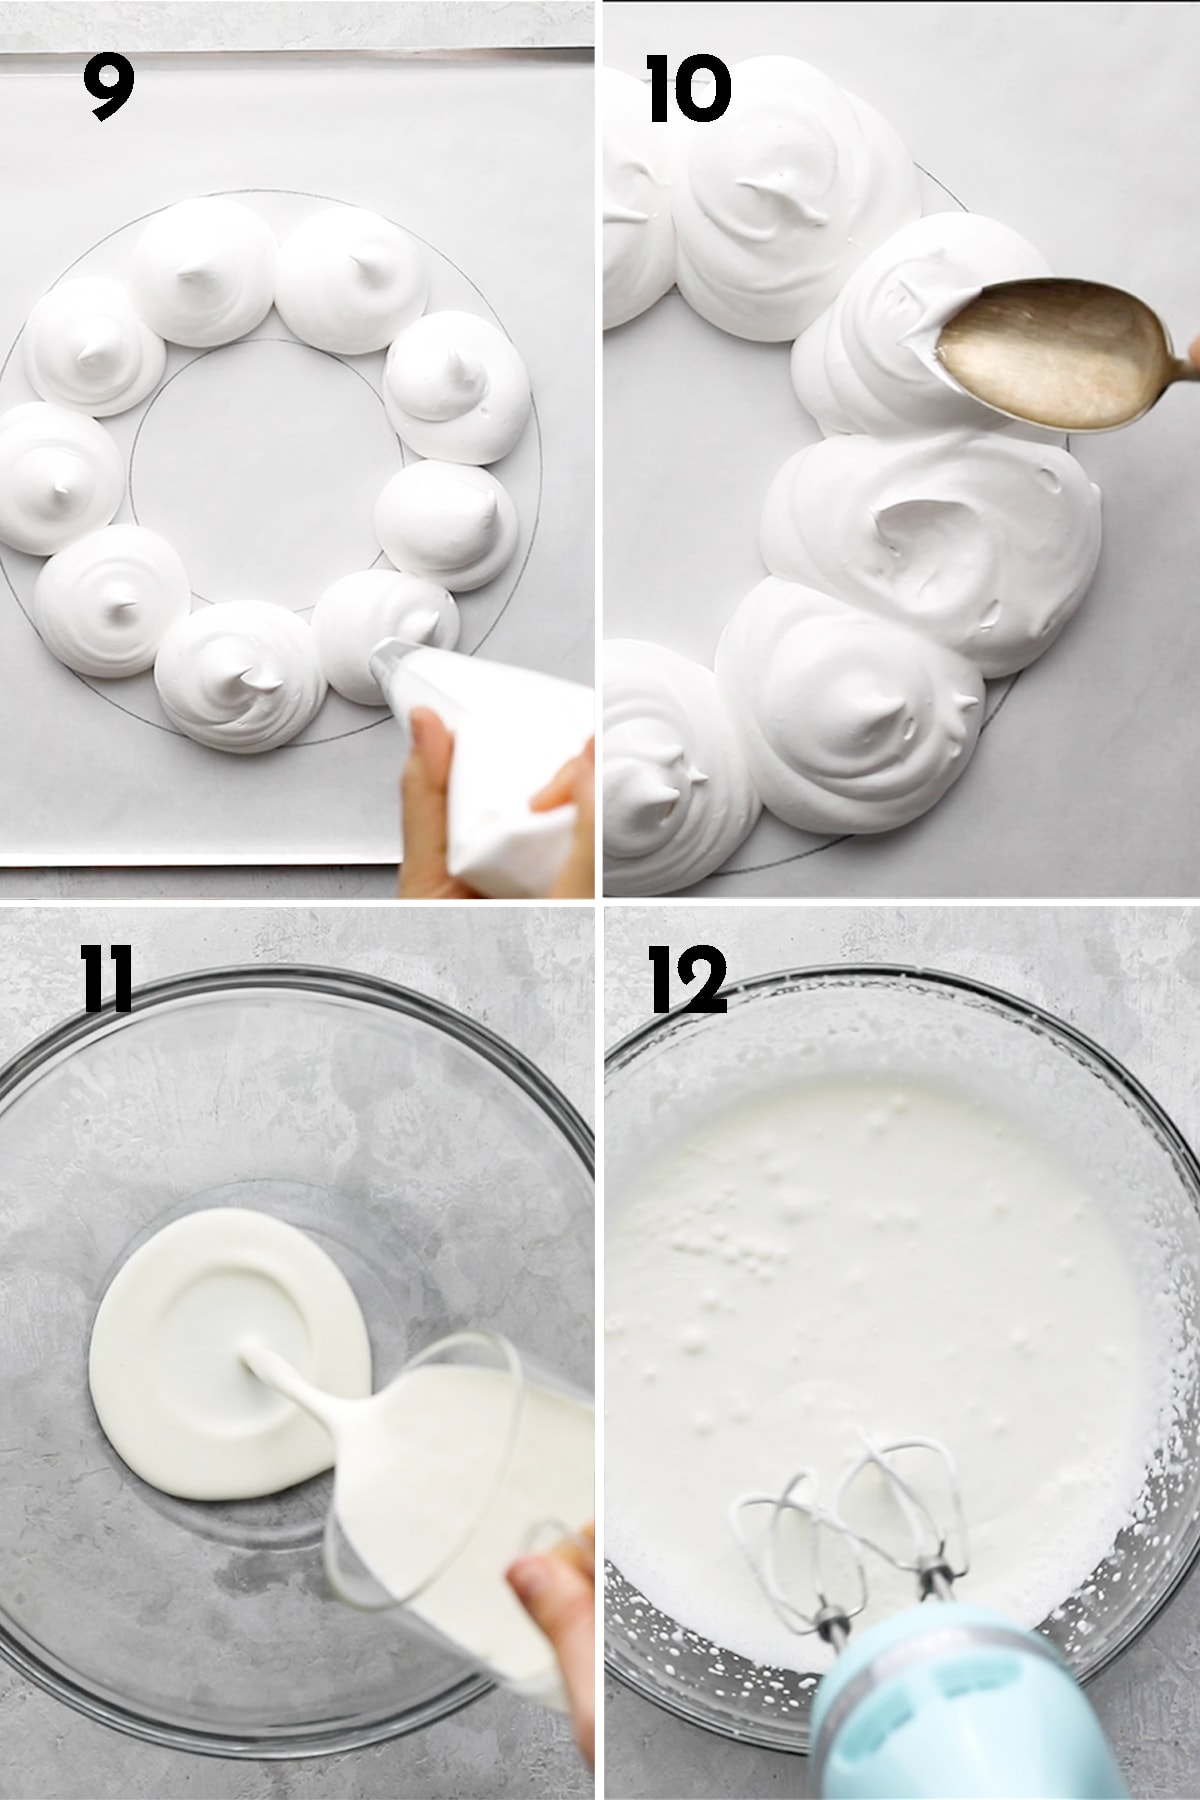 instructions to make pavlova wreath: transfer to piping bag, pipe forming 10 mounds, create dents with back of spoon, bake for 1 hour and 15 minutes, beat whipped cream.